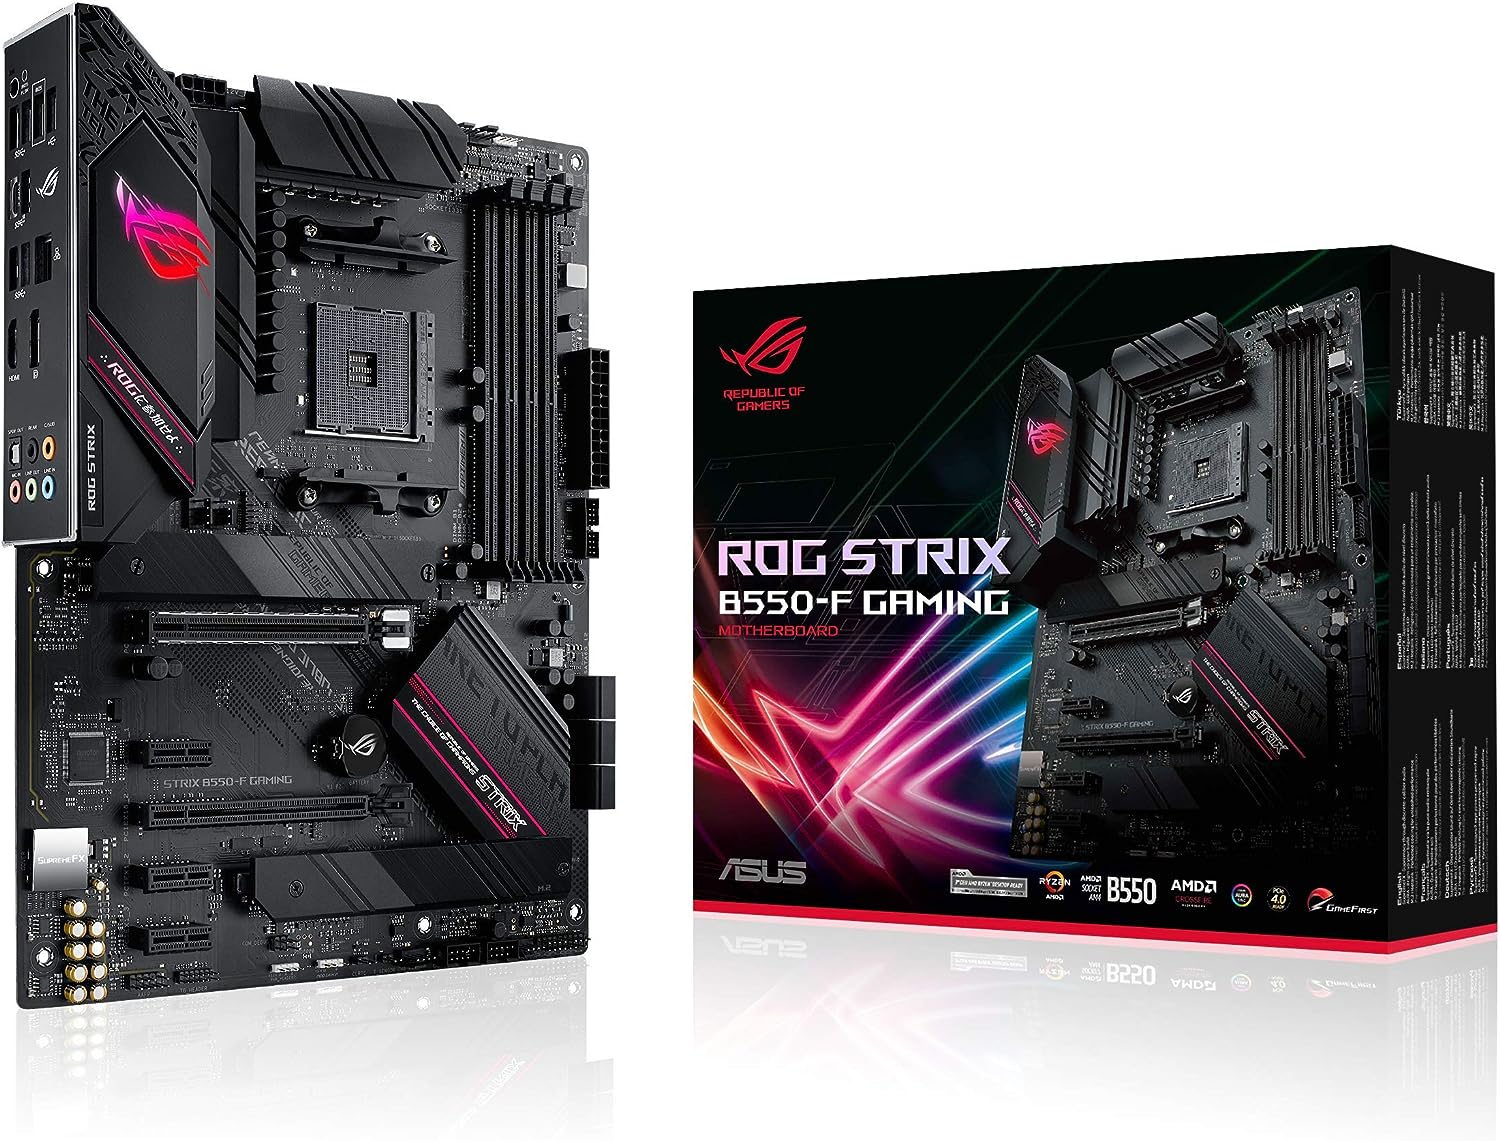 Asus ROG Strix B550-F Gaming motherboard with AM4 socket for AMD Ryzen 3rd gen processors 0192876749692